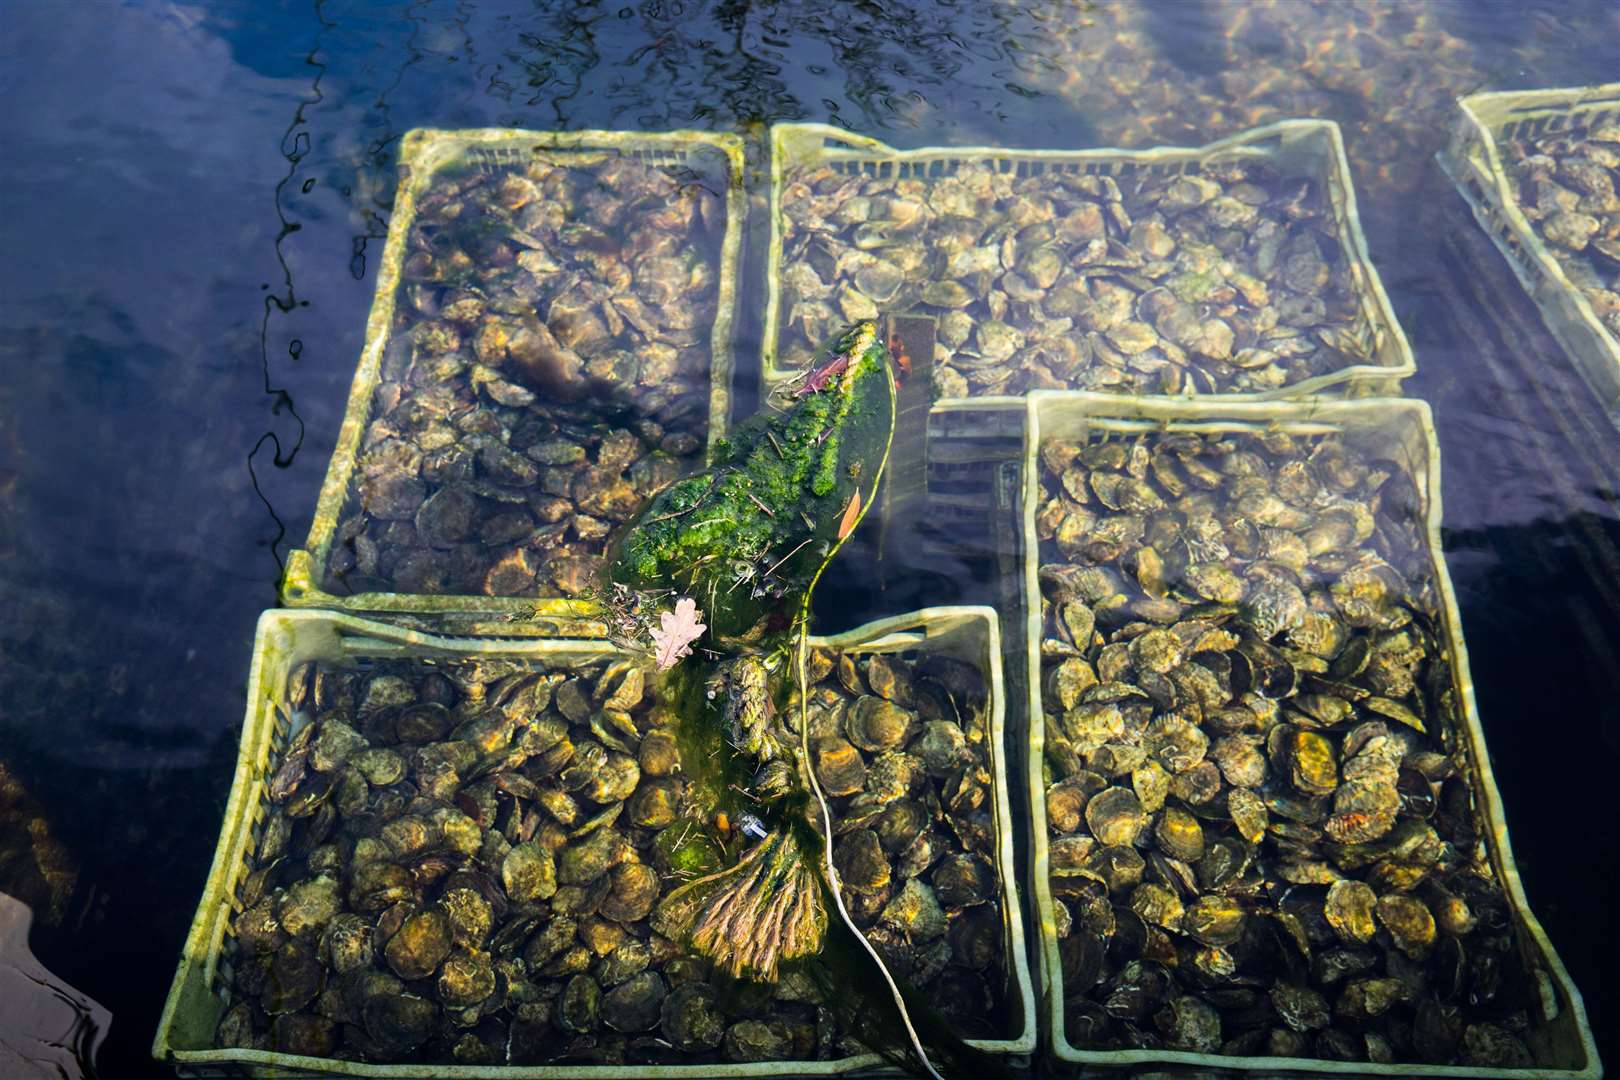 Native Oyster, seen here in baskets, boost wildlife and purify water (ZSL/PA)